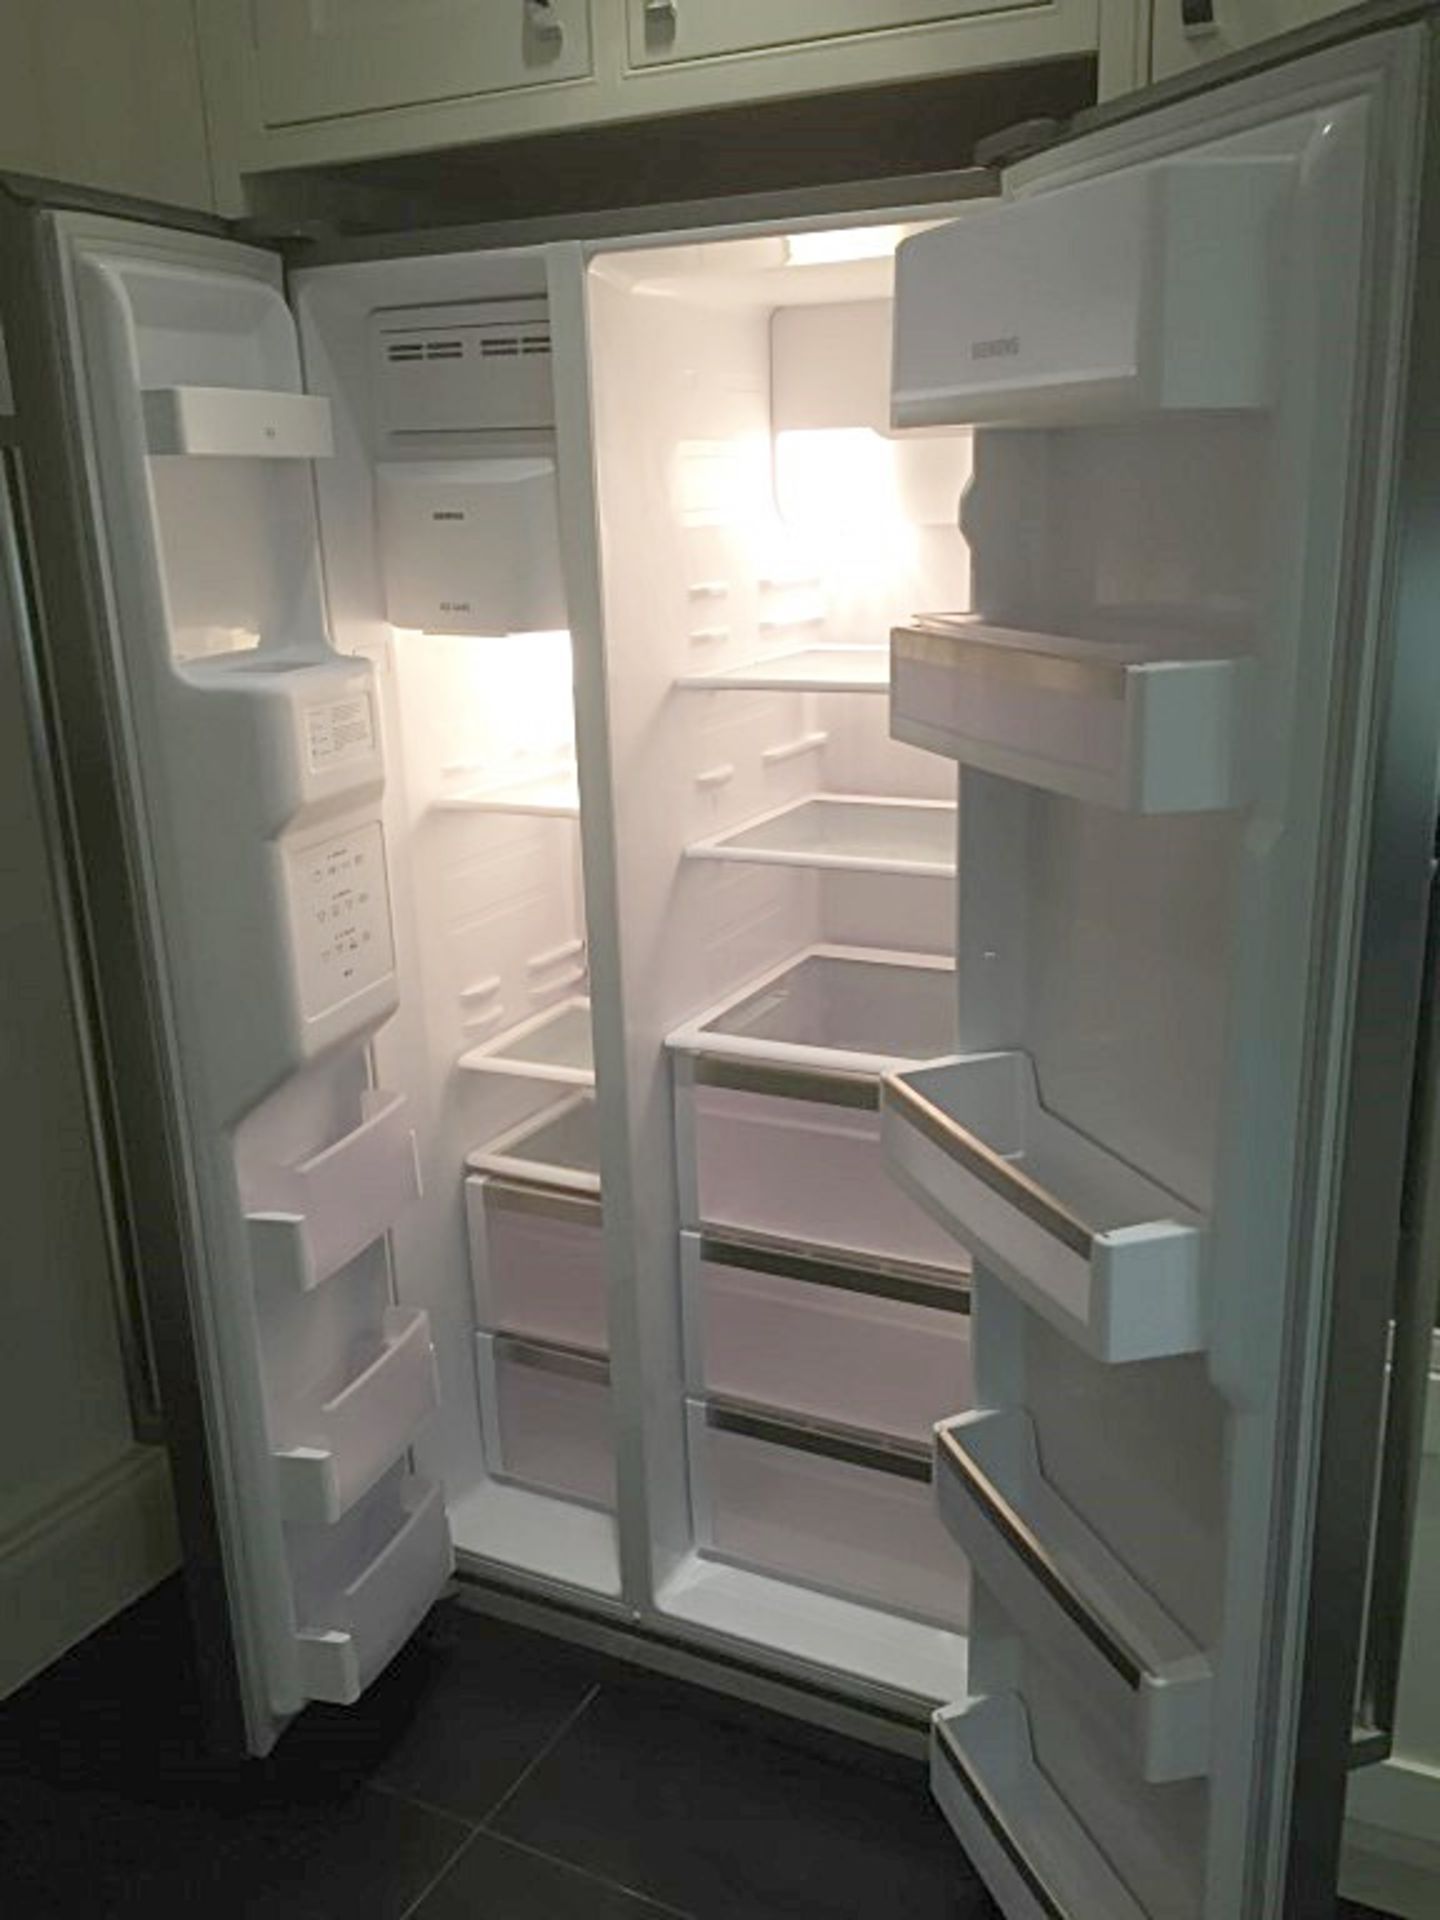 1 x Siemens American Fridge / Freezer - Approx 3-4yrs Old In Excellent Working Condition - CL211 - - Image 2 of 8